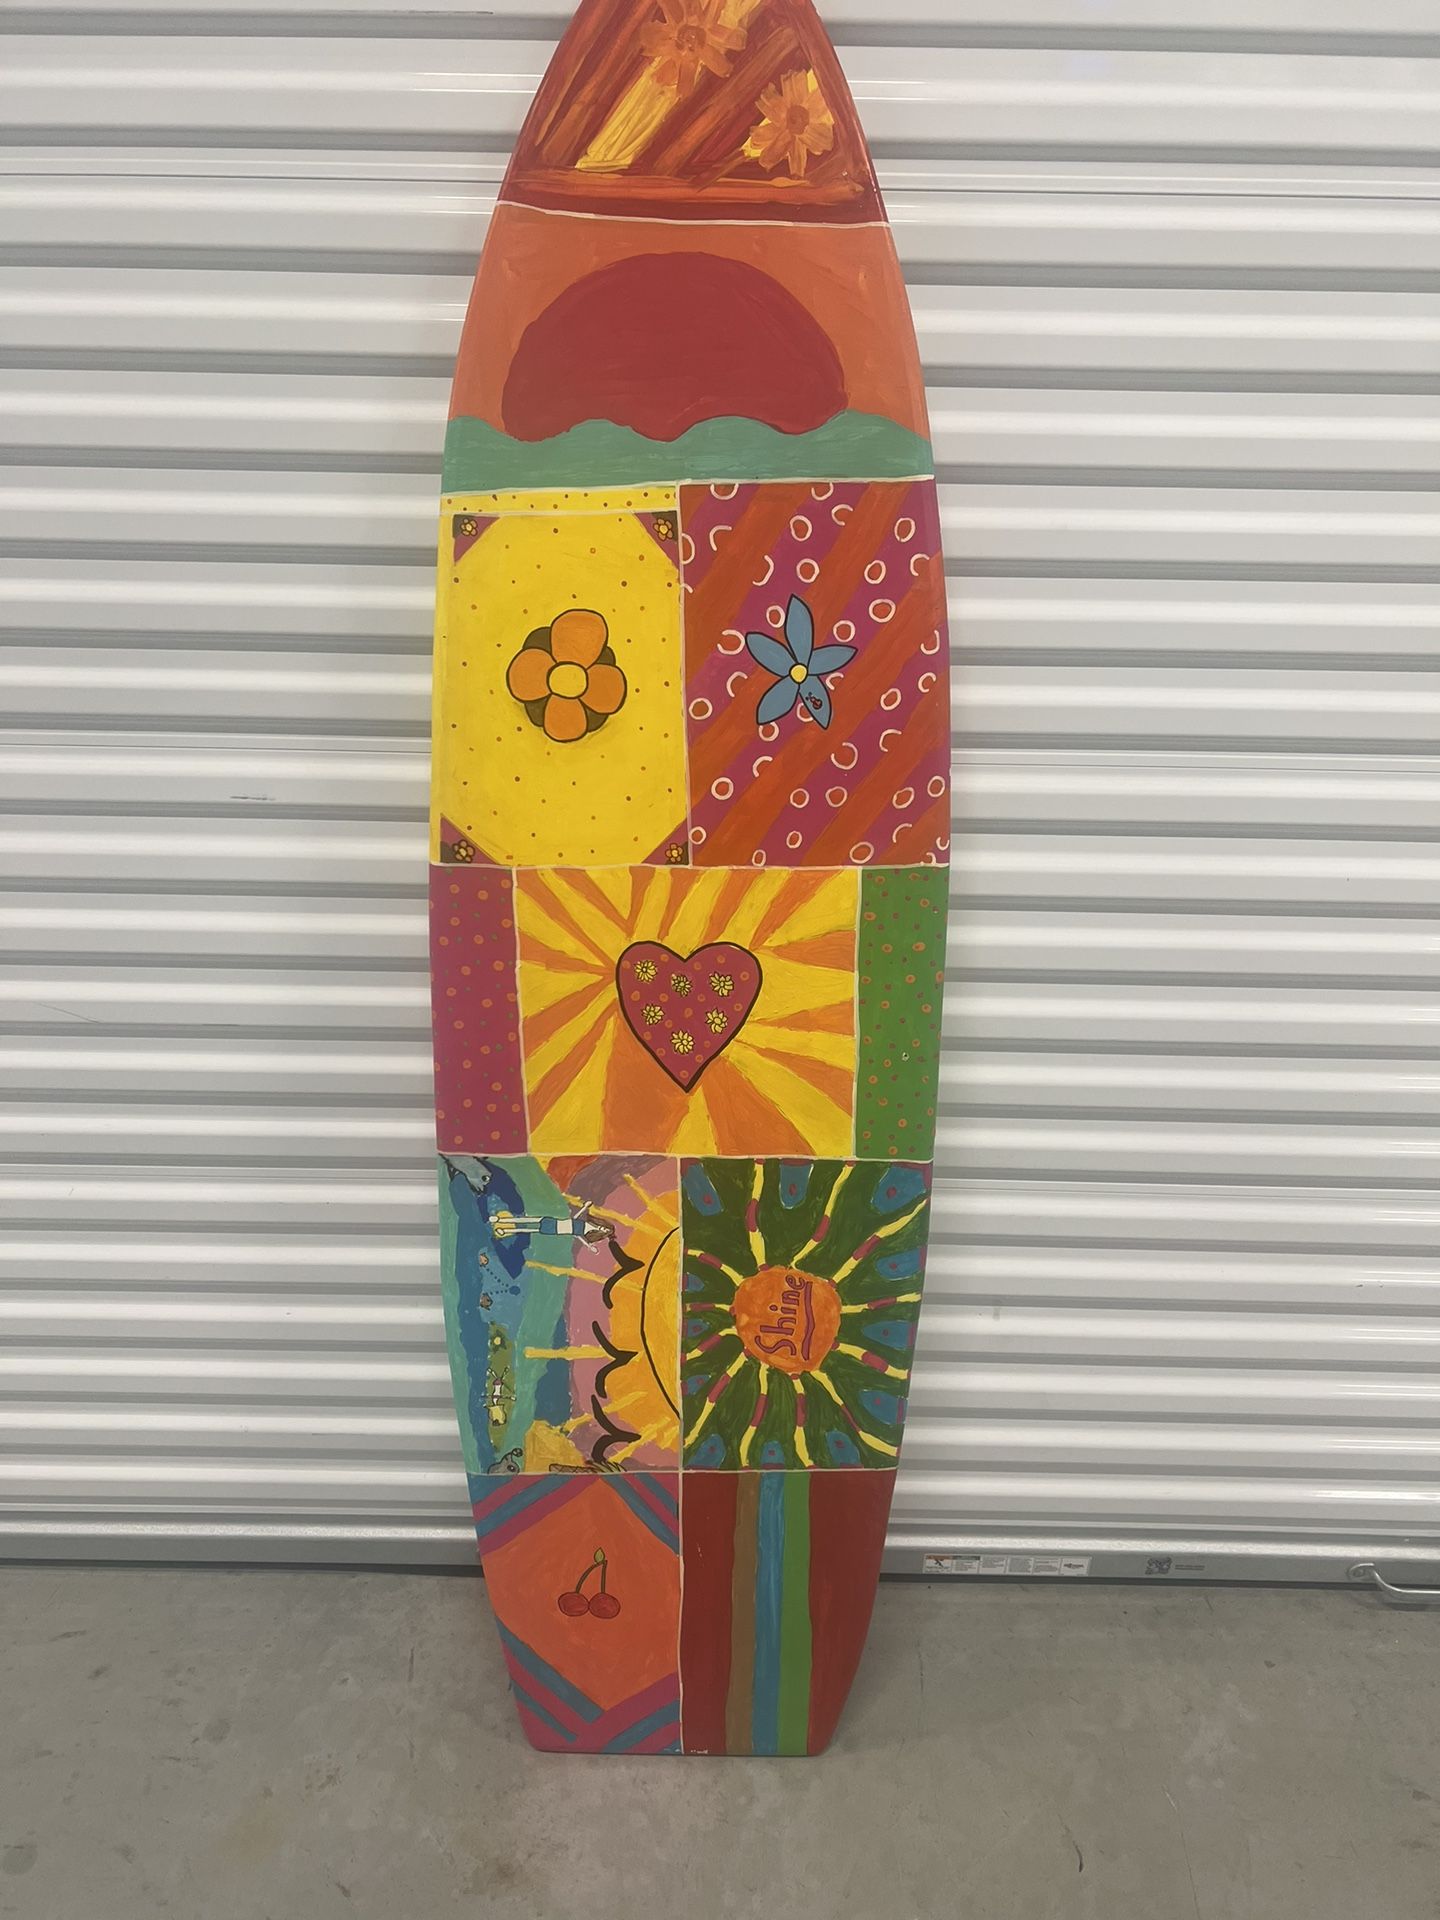 6FT Wood Surfboard  Wall Art  Hand Custom Painted Decor Bright Vibrant Summerish. Board is ideal for a kids room or can be used in almost any place to